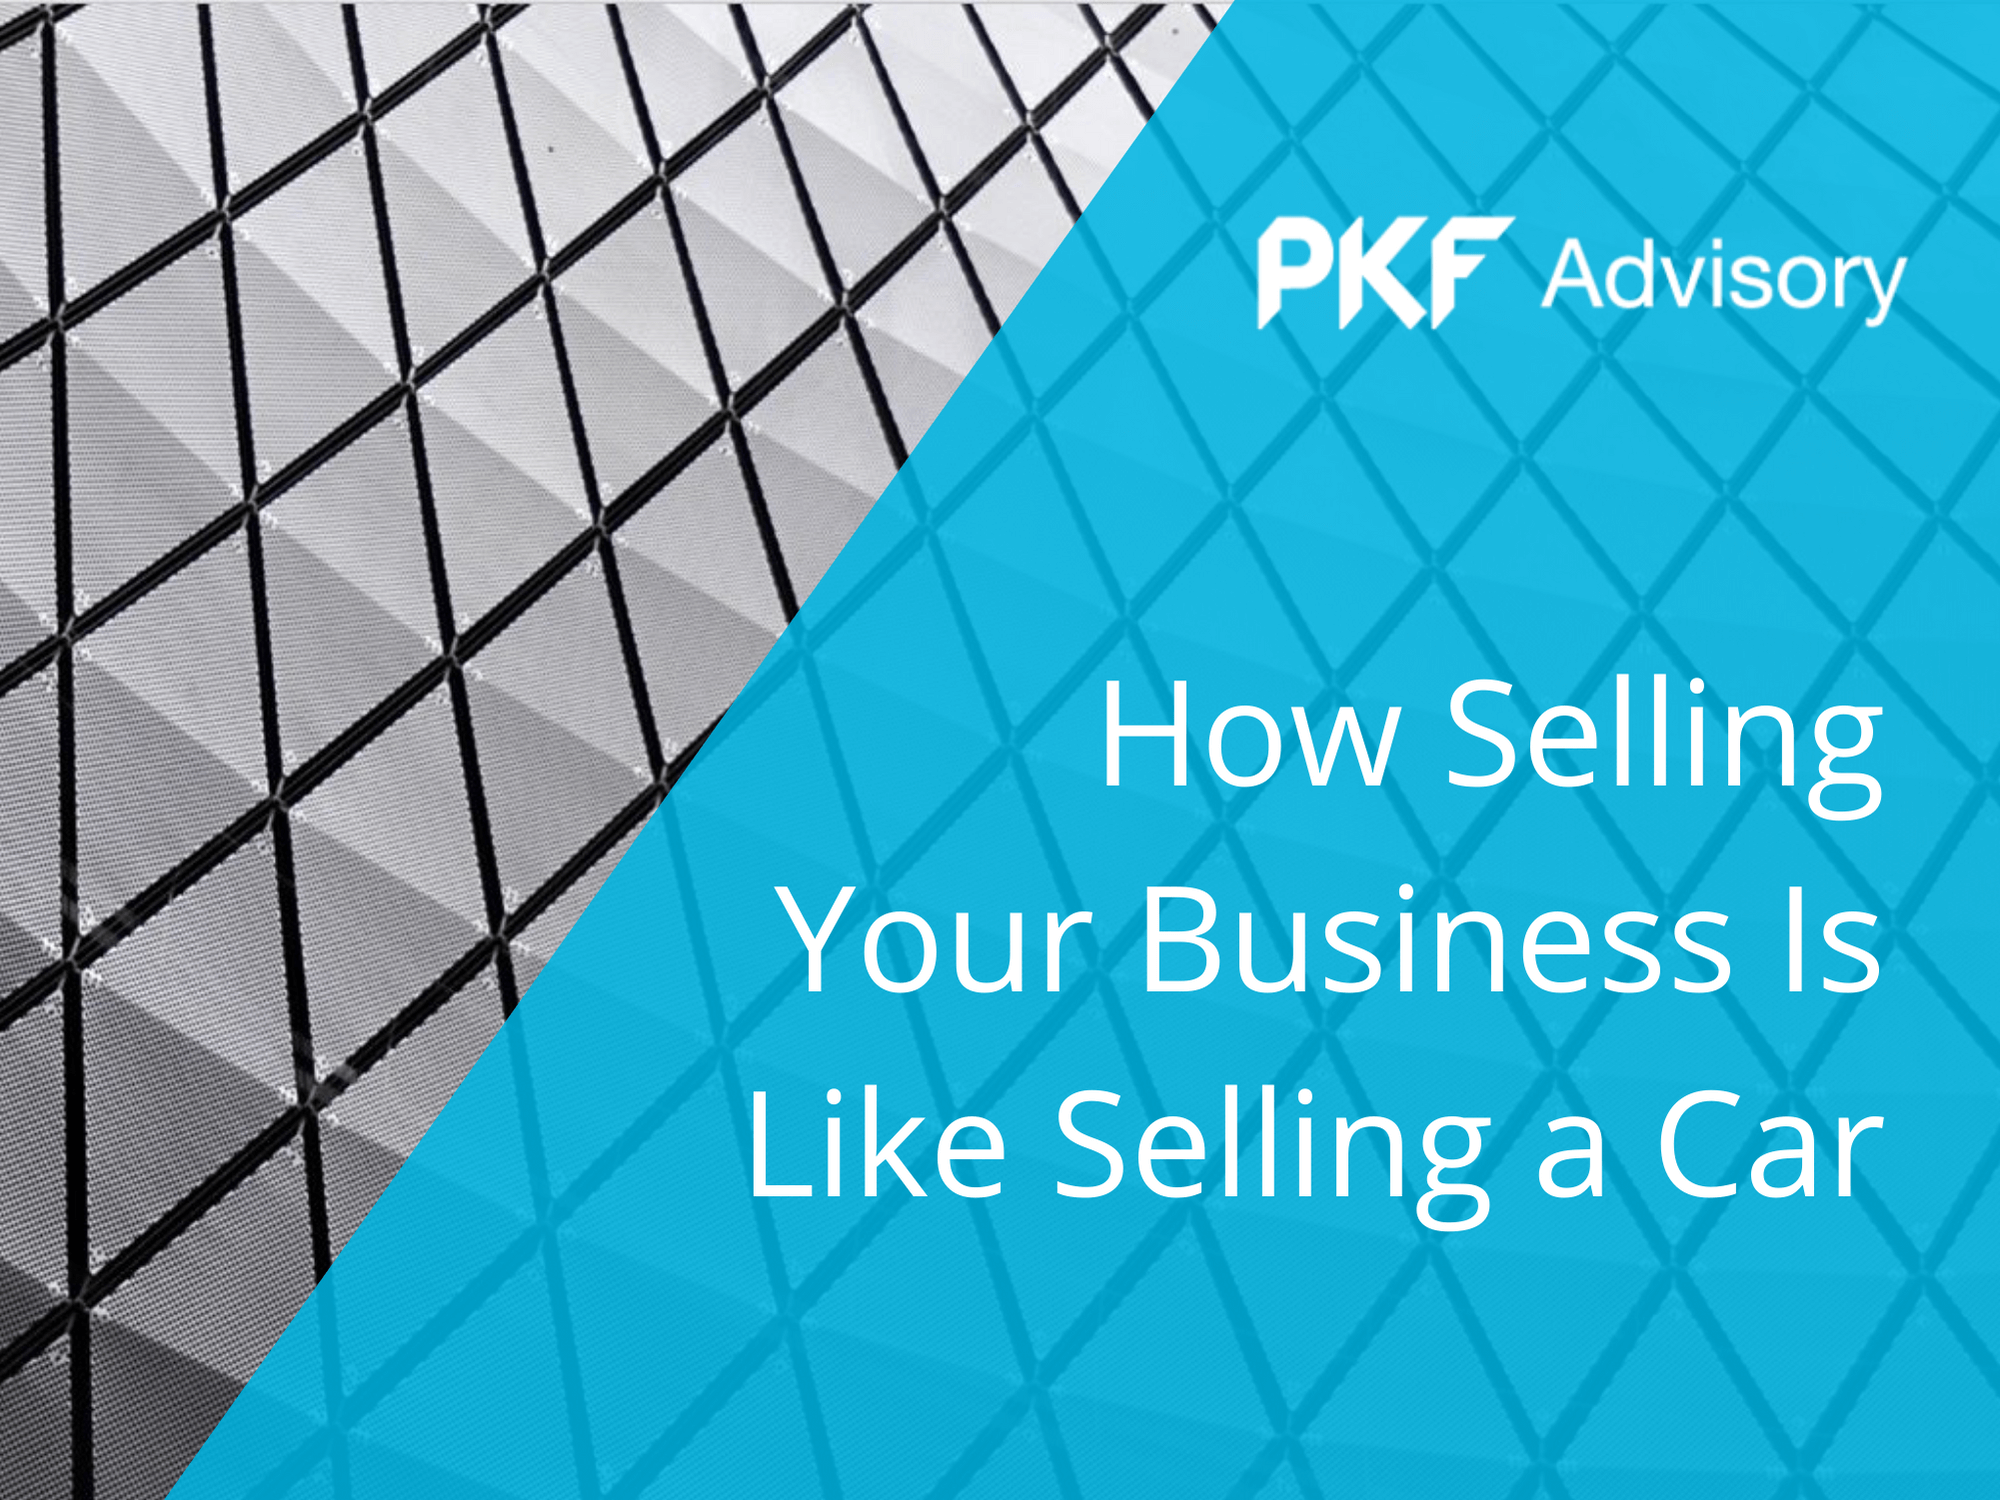 How Selling Your Business Is Like Selling a Car - PKF Advisory